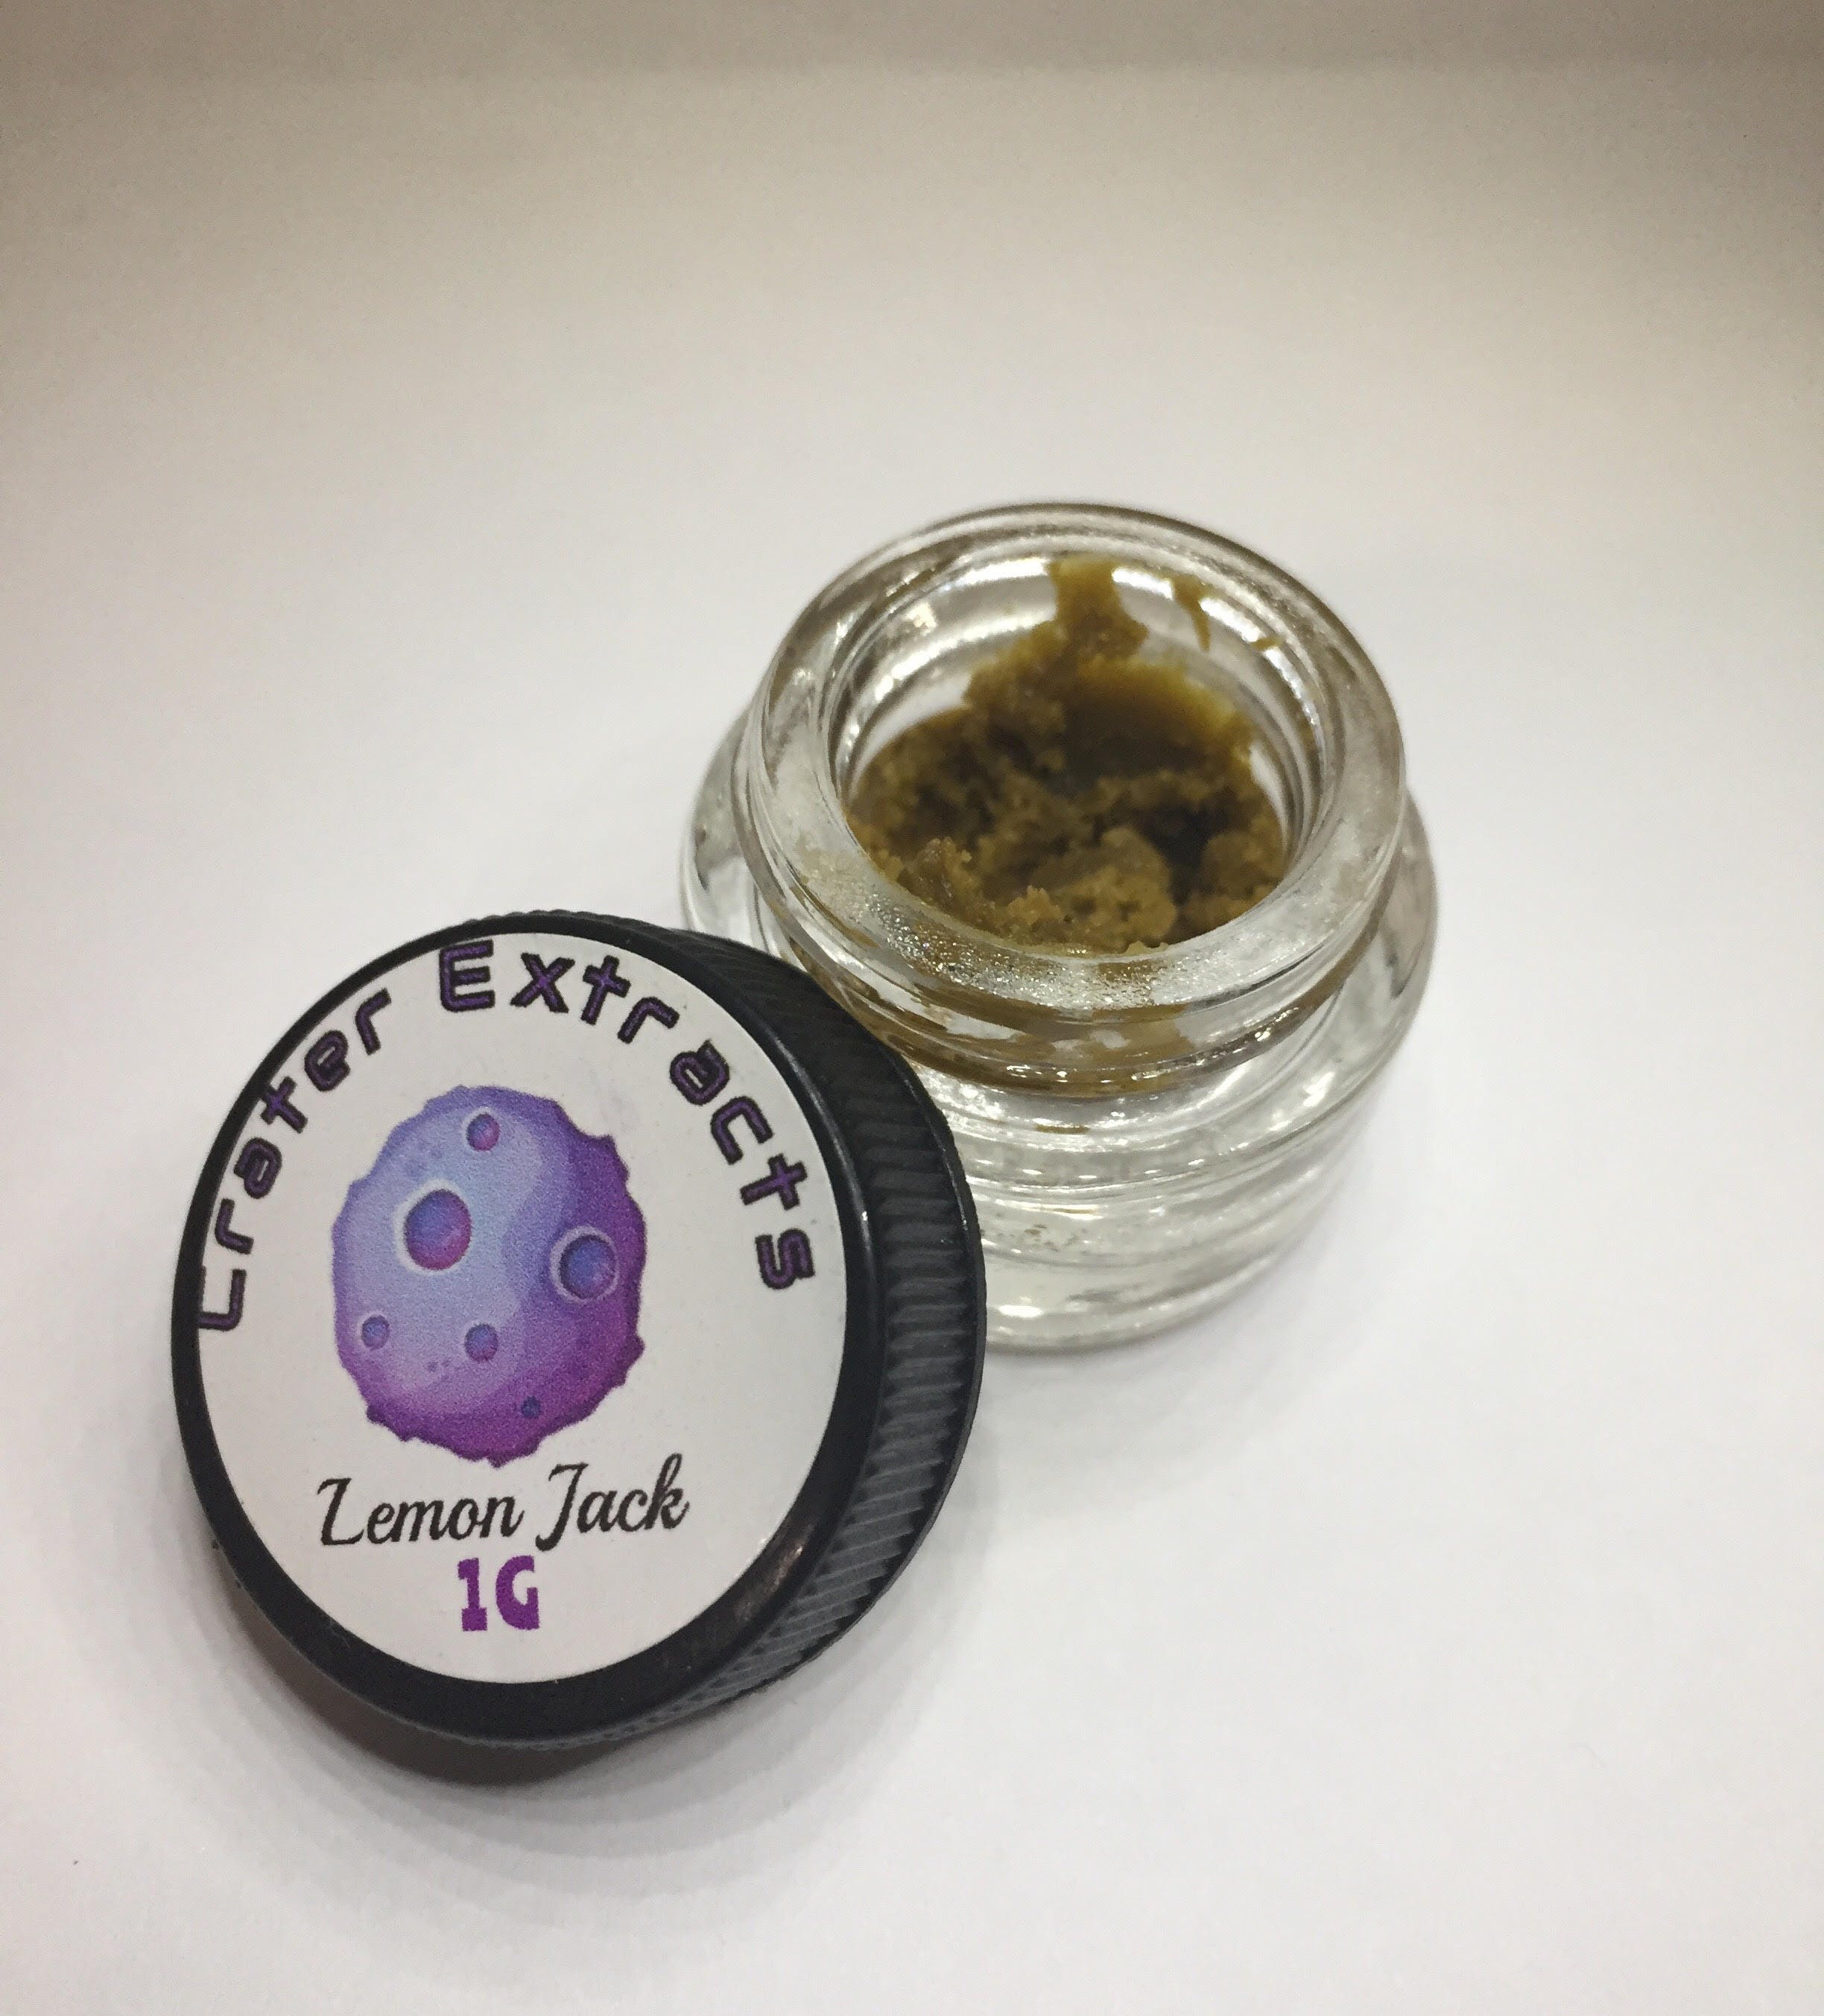 Crater Extracts : Lemon Jack